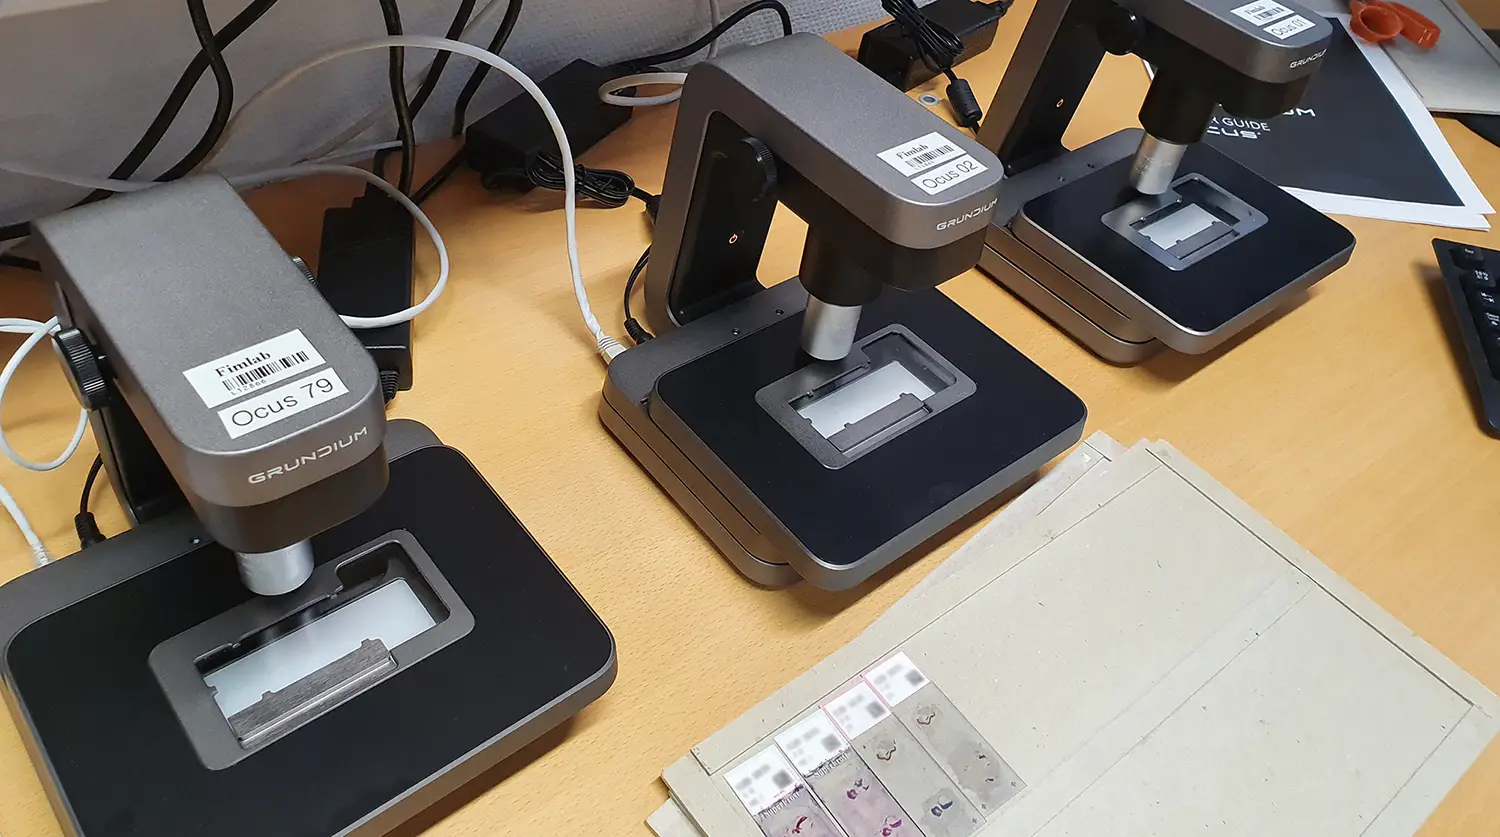 Fimlab's three Ocus scanners at work for their frozen section process